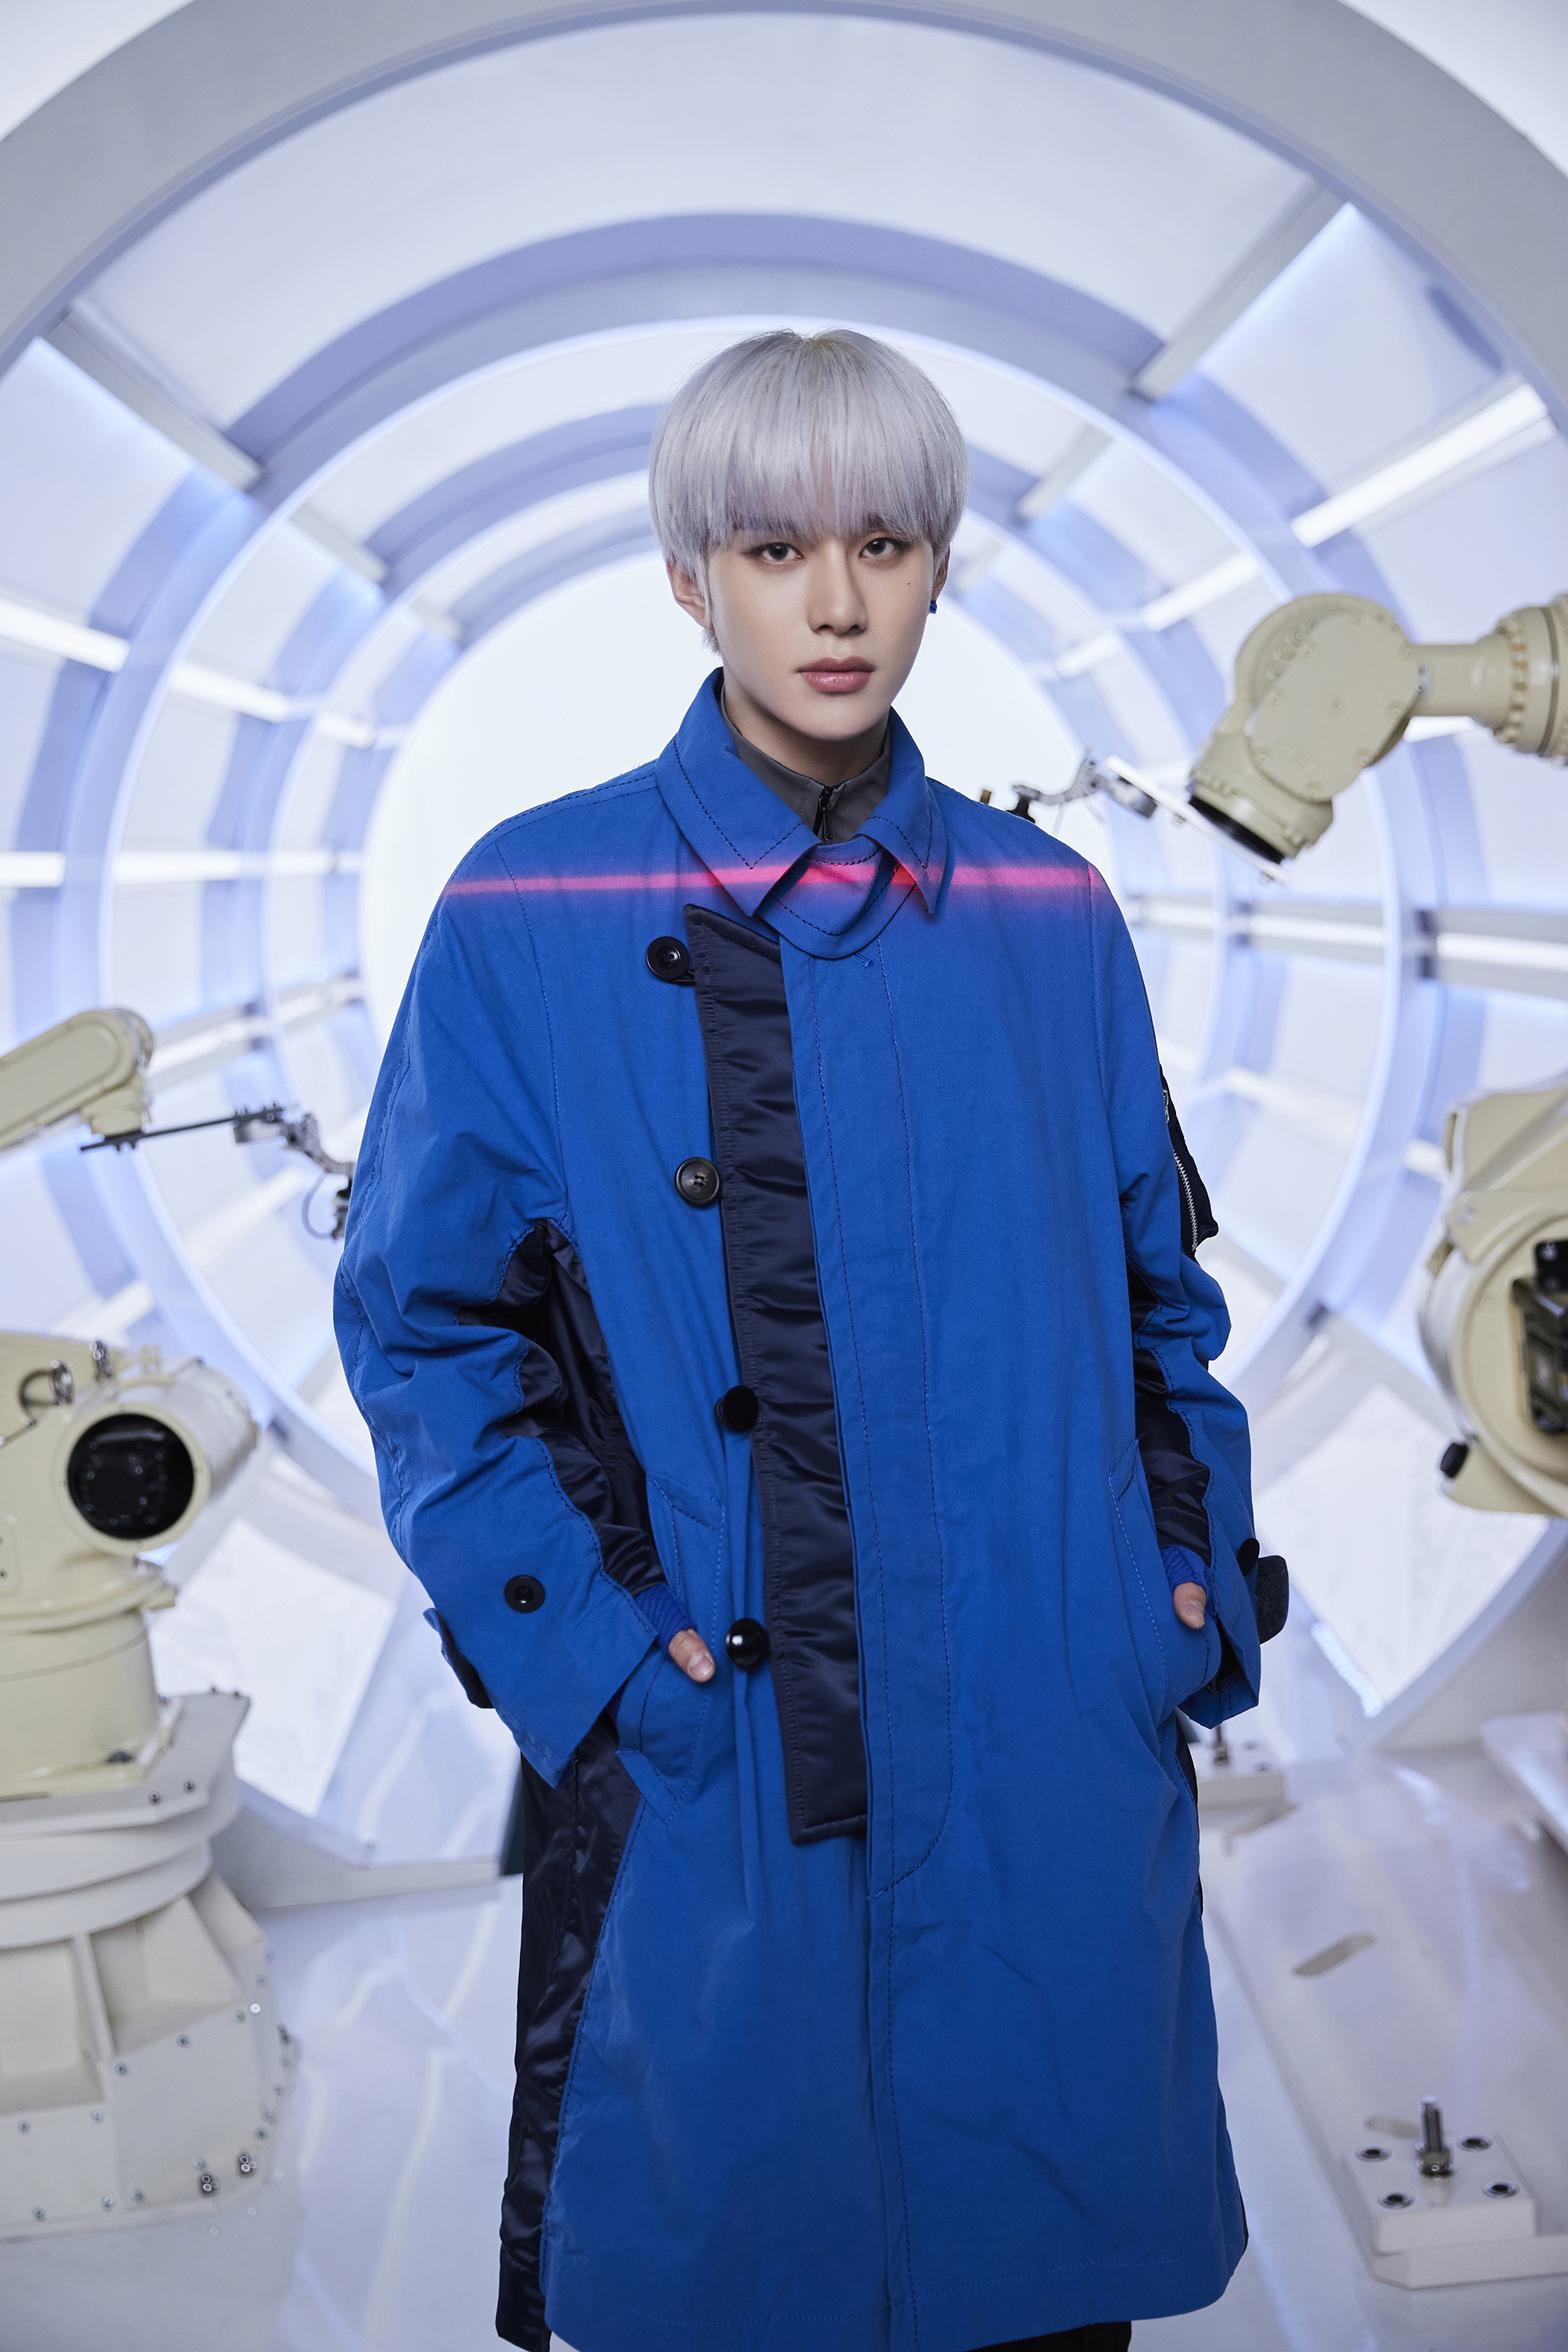 NCT Jungwoo 'Universe' concept photo